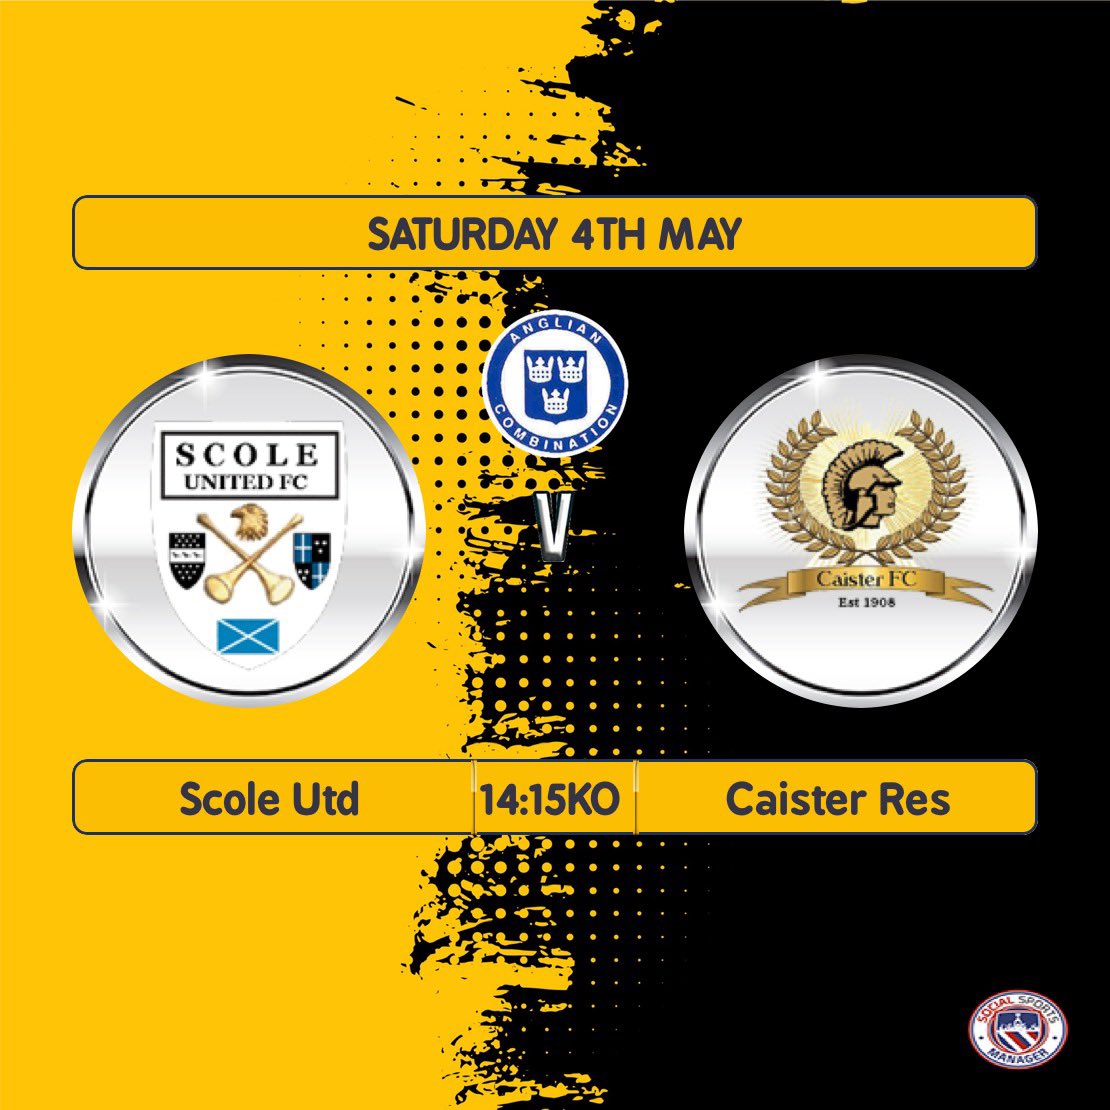 MASSIVE game for the ressies Saturday when they host @caisterfc1 res! Only a win will see them survive so all the support possible is appreciated, bar will be open too and weather is supposed to be good so come and cheer the lads on they need it!! ☀️🍻💛🖤 #UTS